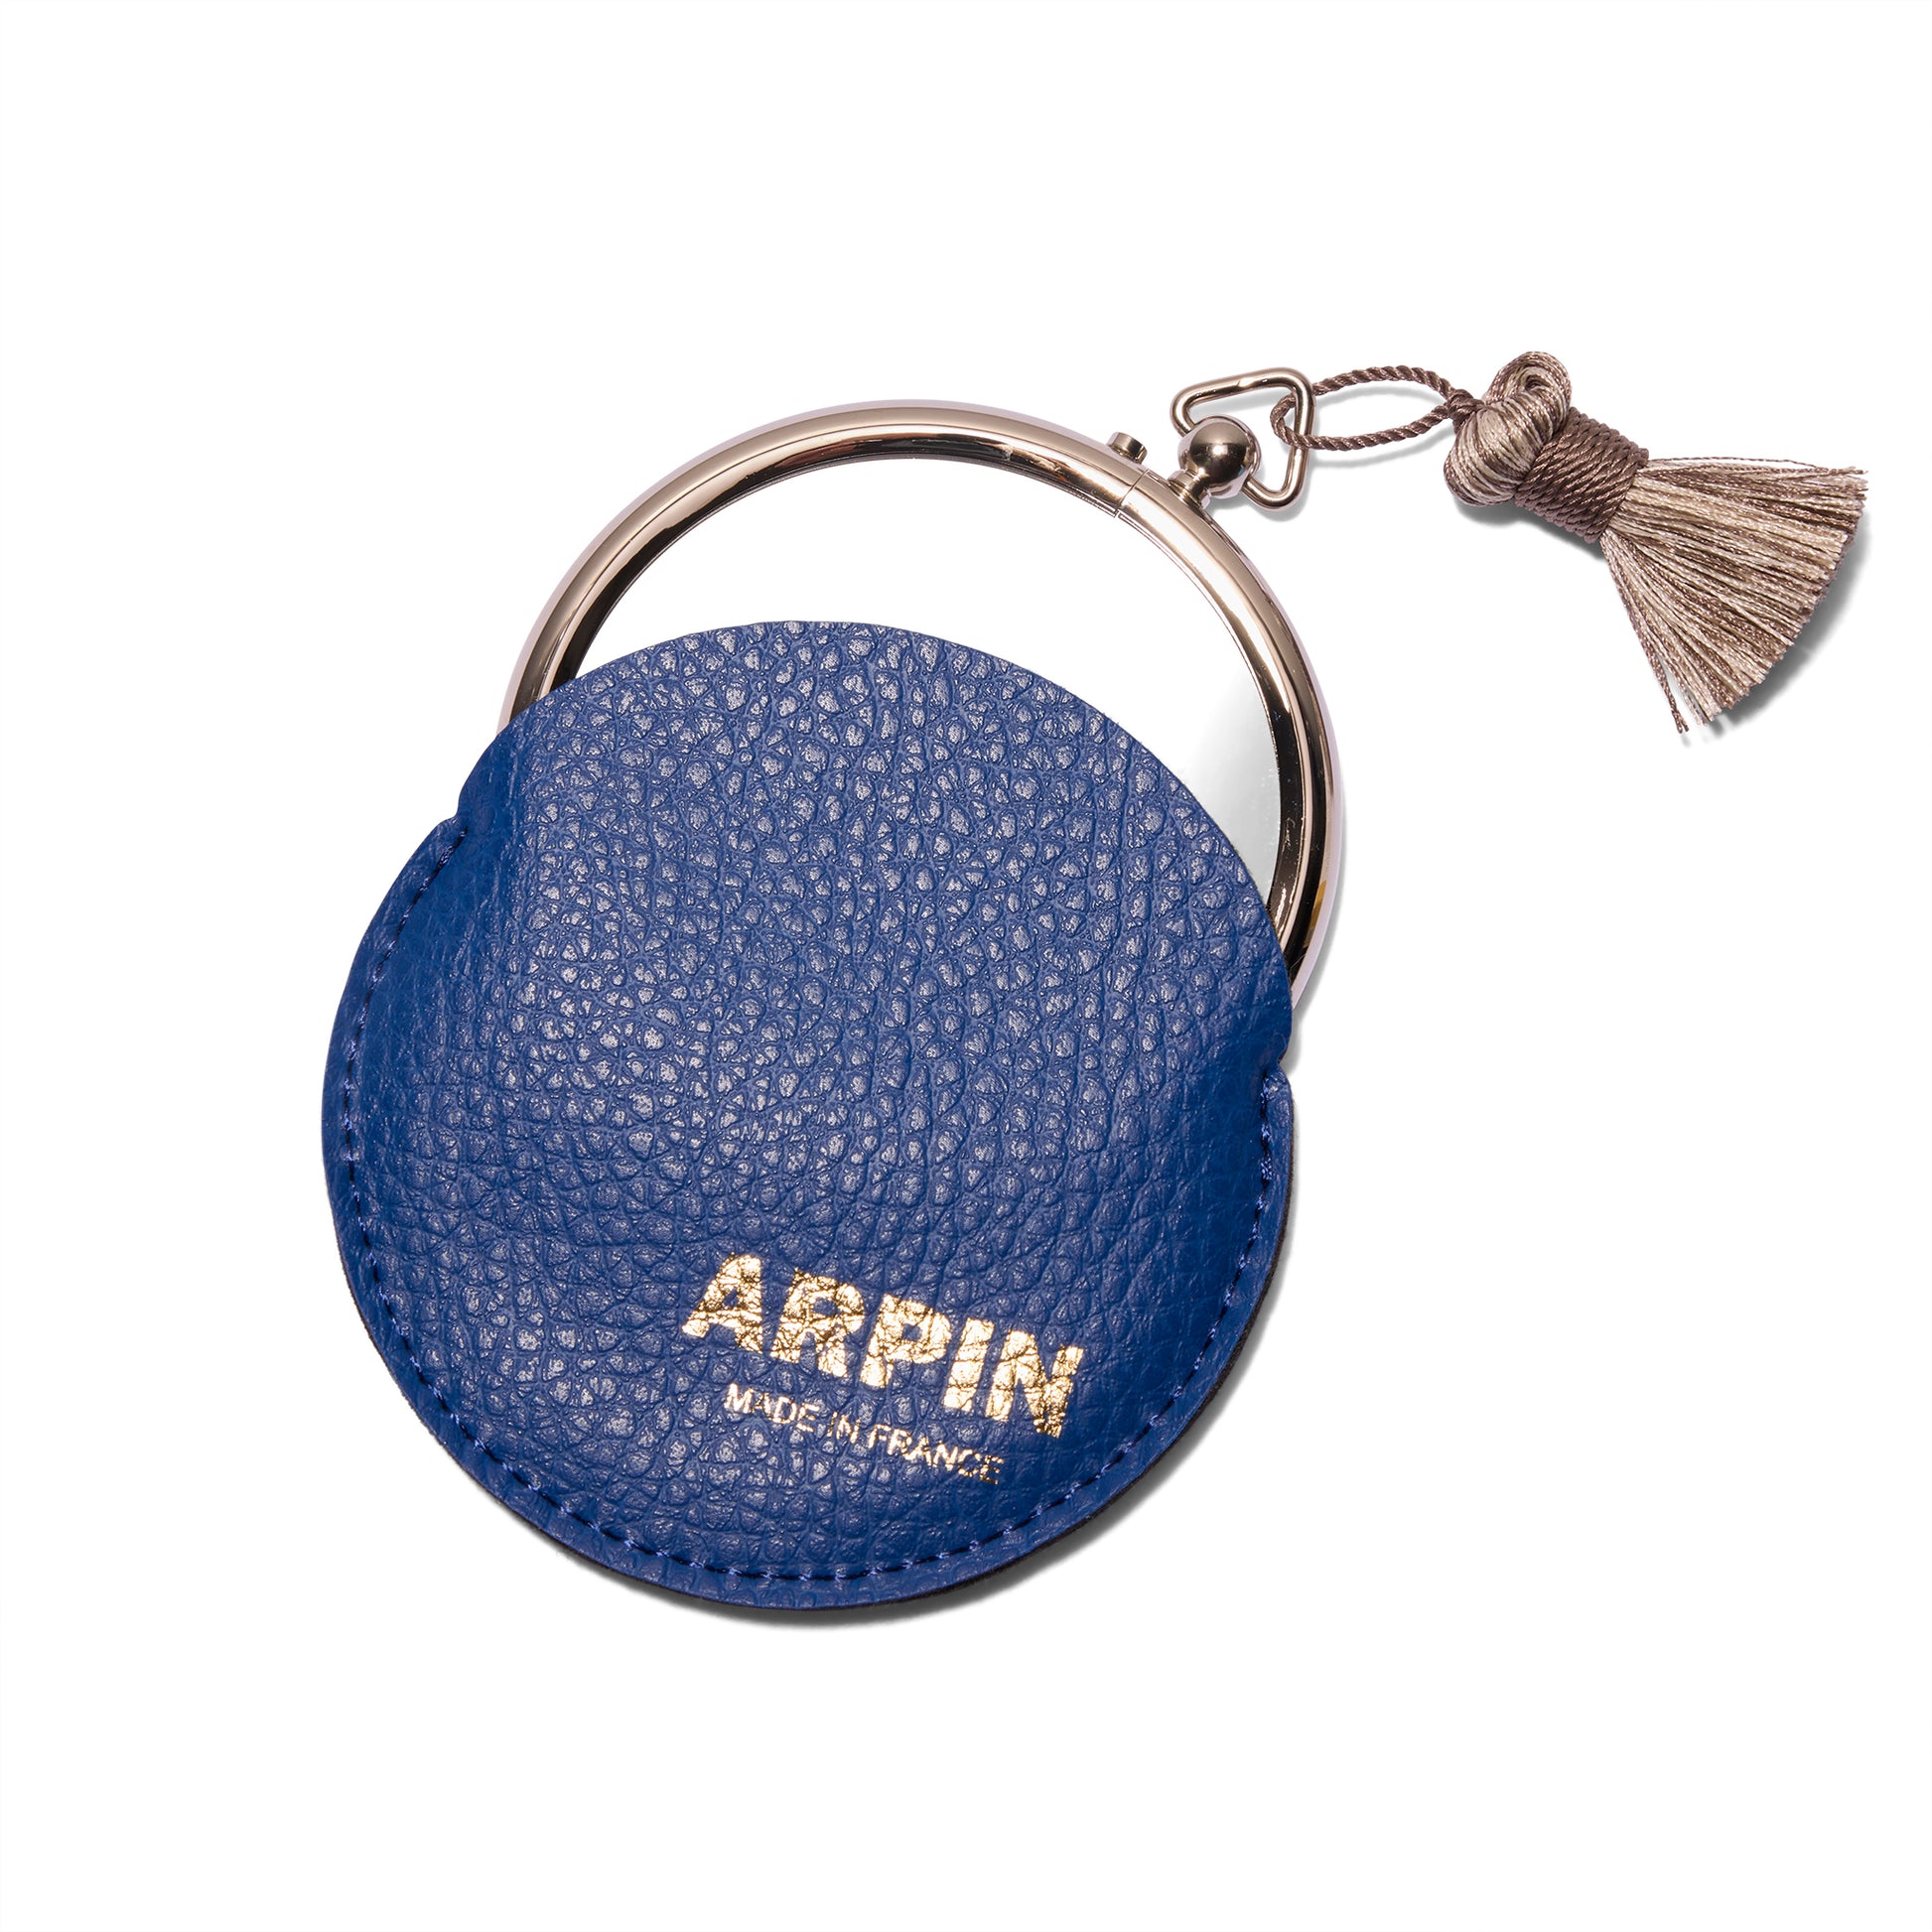 Arpin Hand Bag Mirror from the front and is peeking out of the deep blue leather case with gold lettering that says Arpin. The  silver grey tassel is on the top right of the mirror.